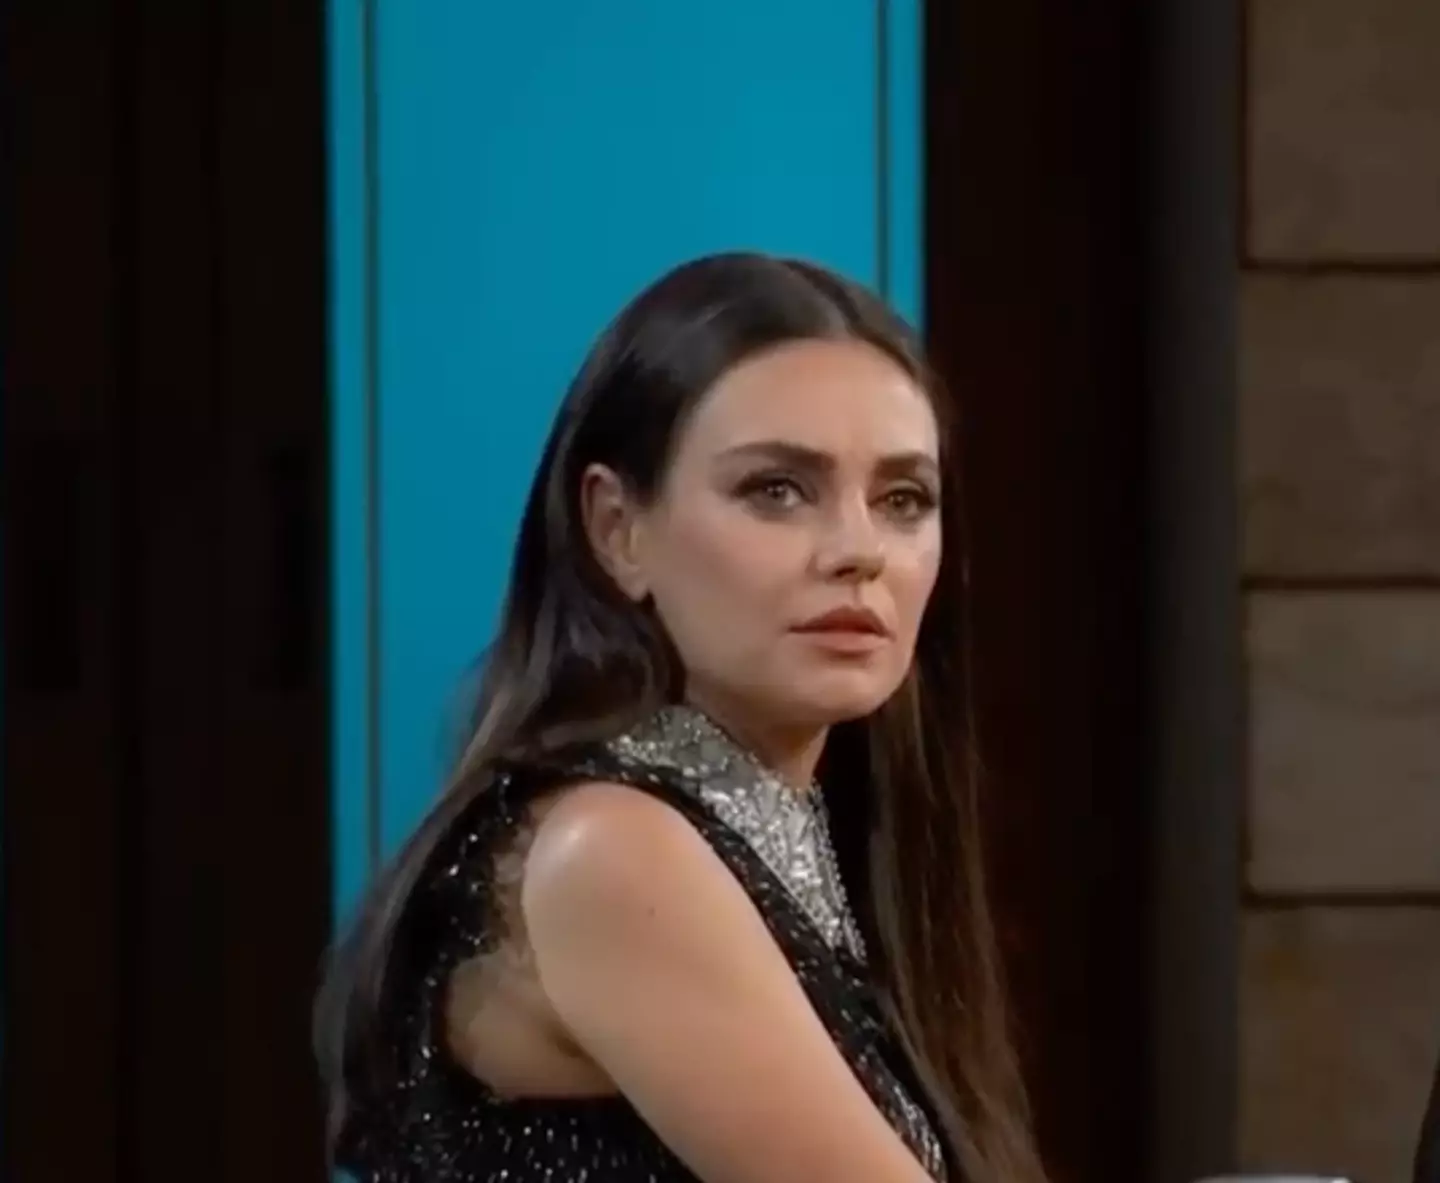 Kunis was shocked to hear the audience boo at first.